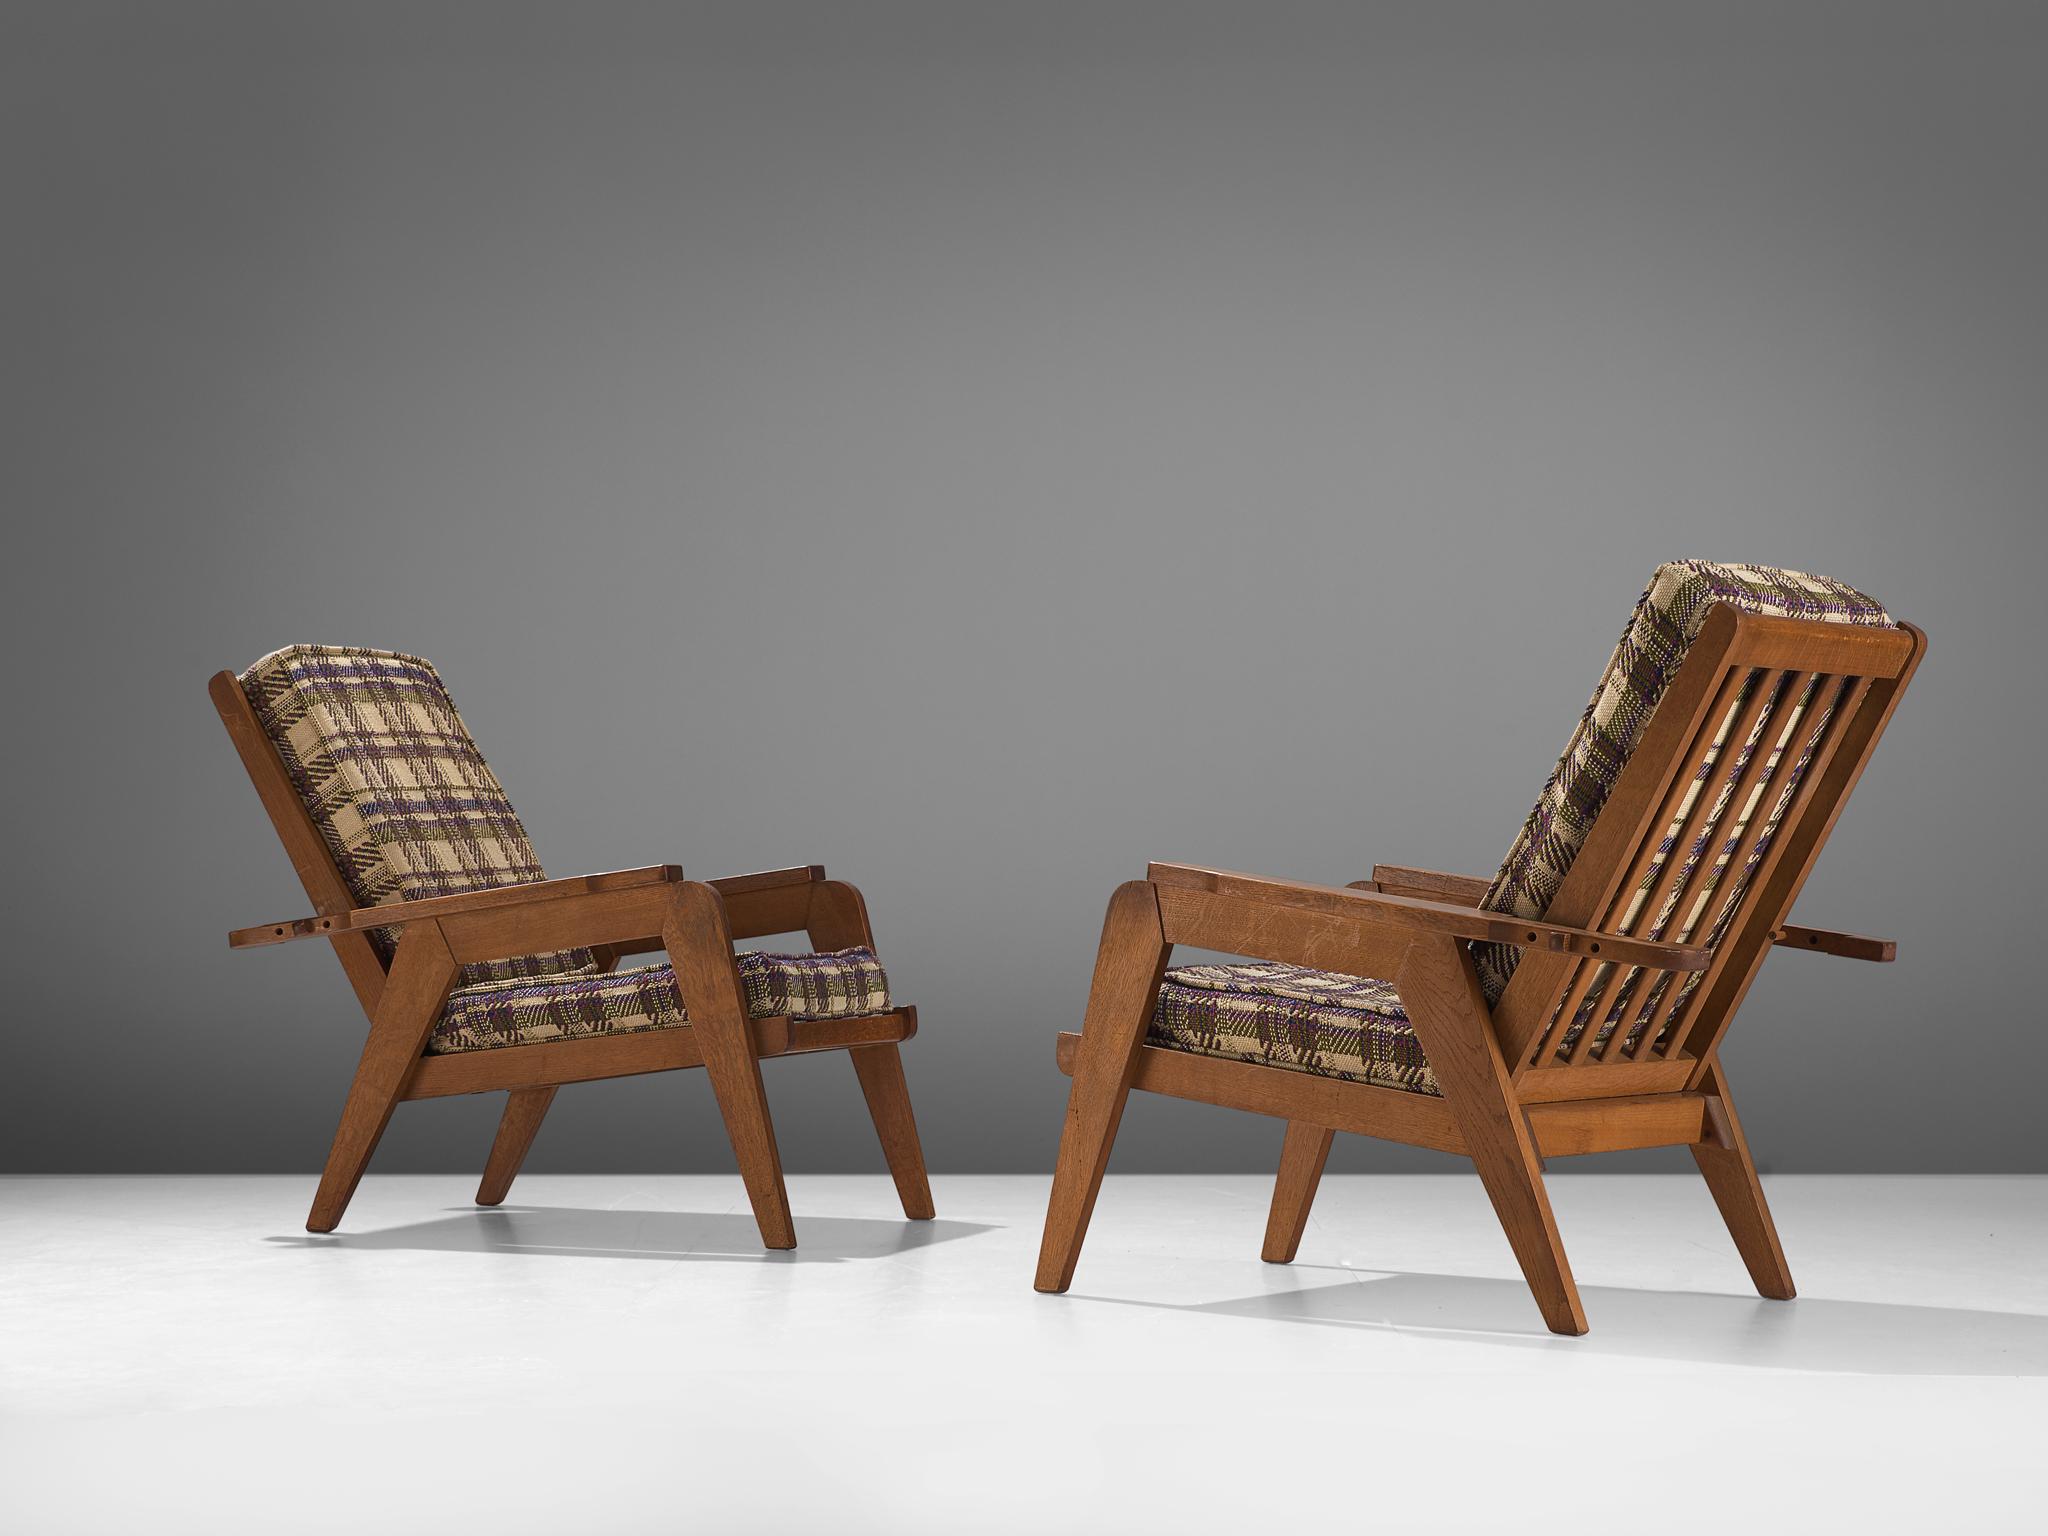 Guillerme et Chambron, pair of lounge chairs, oak and fabric, France, 1960s

This sculptural set of easy chairs by Guillerme and Chambron is very well executed and made out of solid, carved oak. The slatted backrests is adjustable thanks to the